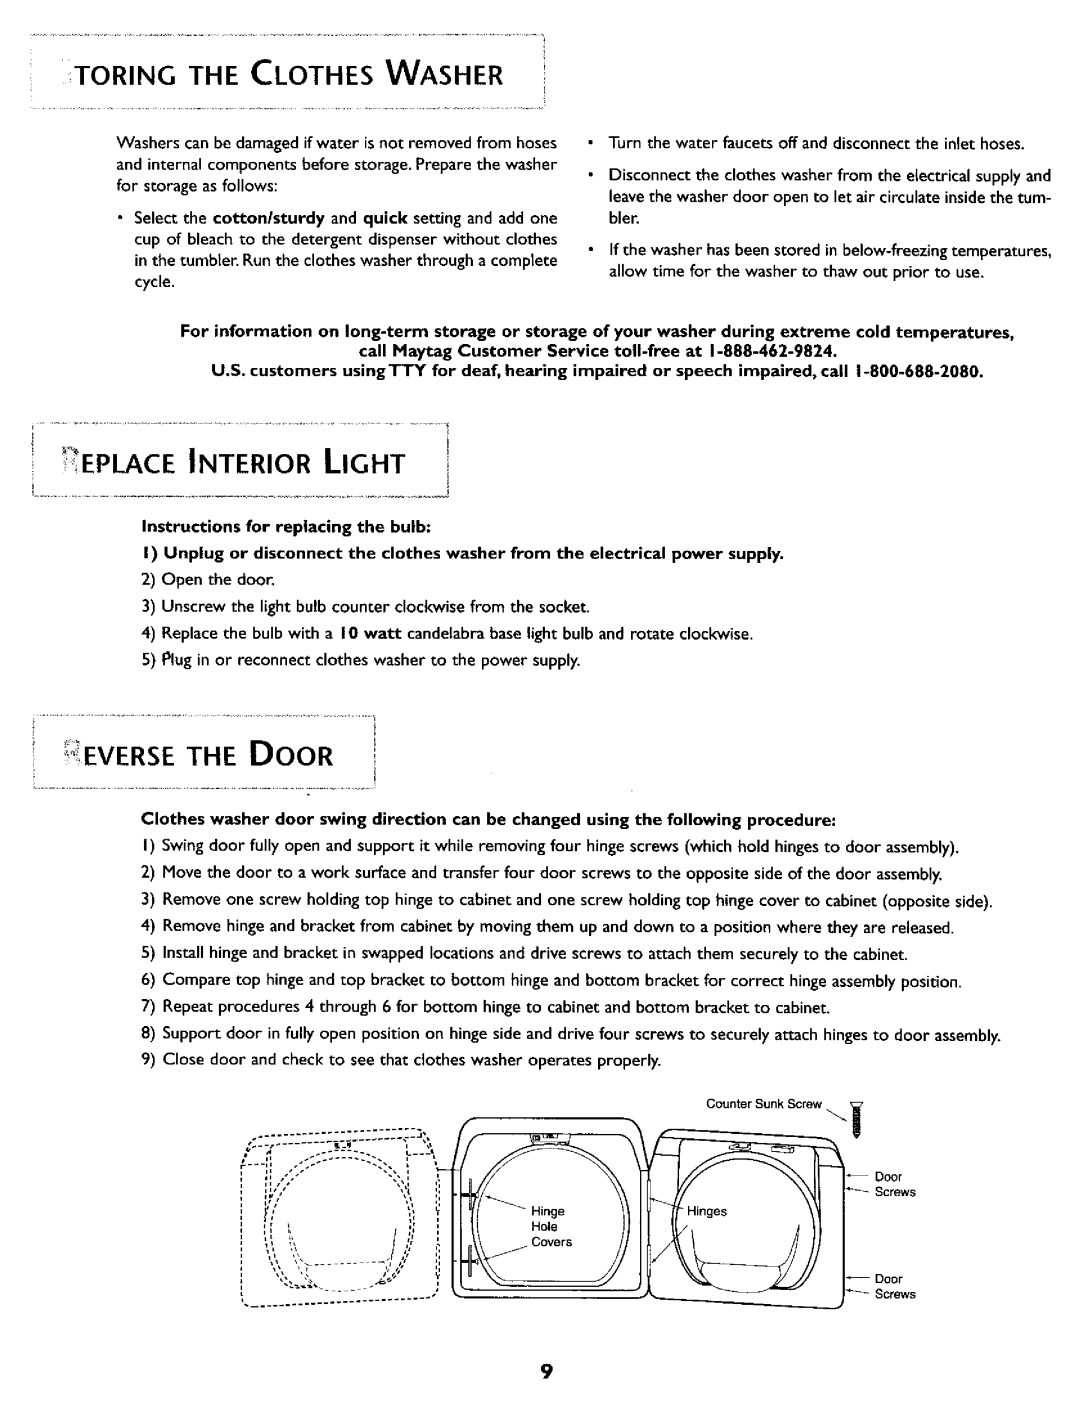 Maytag MAH5500B operating instructions ? Eplace Interior Light, Toring The Clothes Washer 